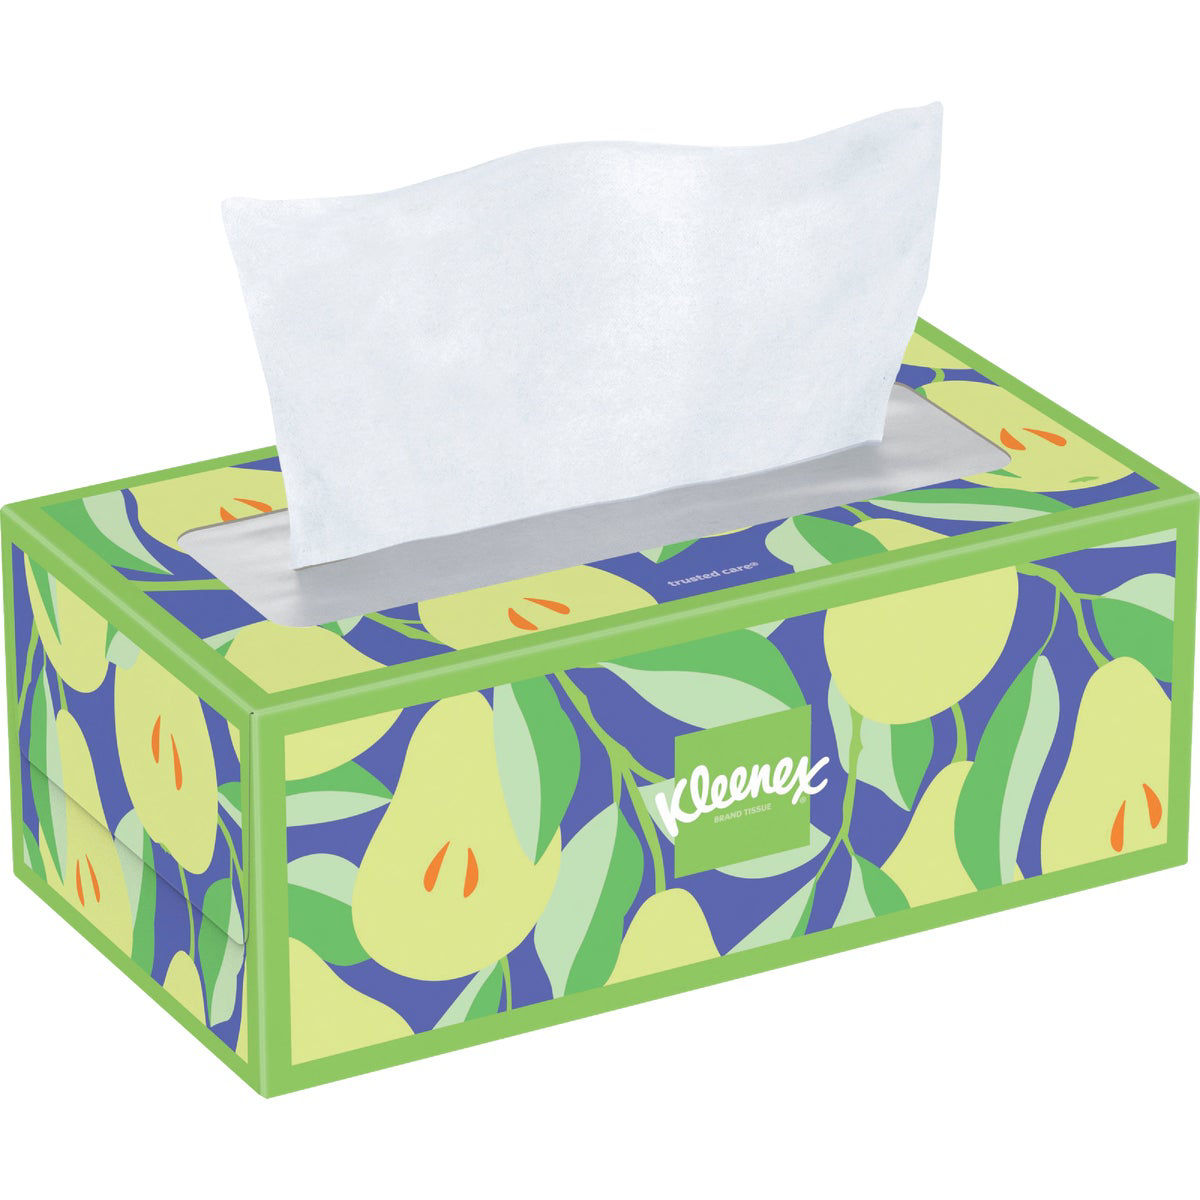 Kleenex Trusted Care 160 Count 2-Ply White Facial Tissue - Bender Lumber Co.